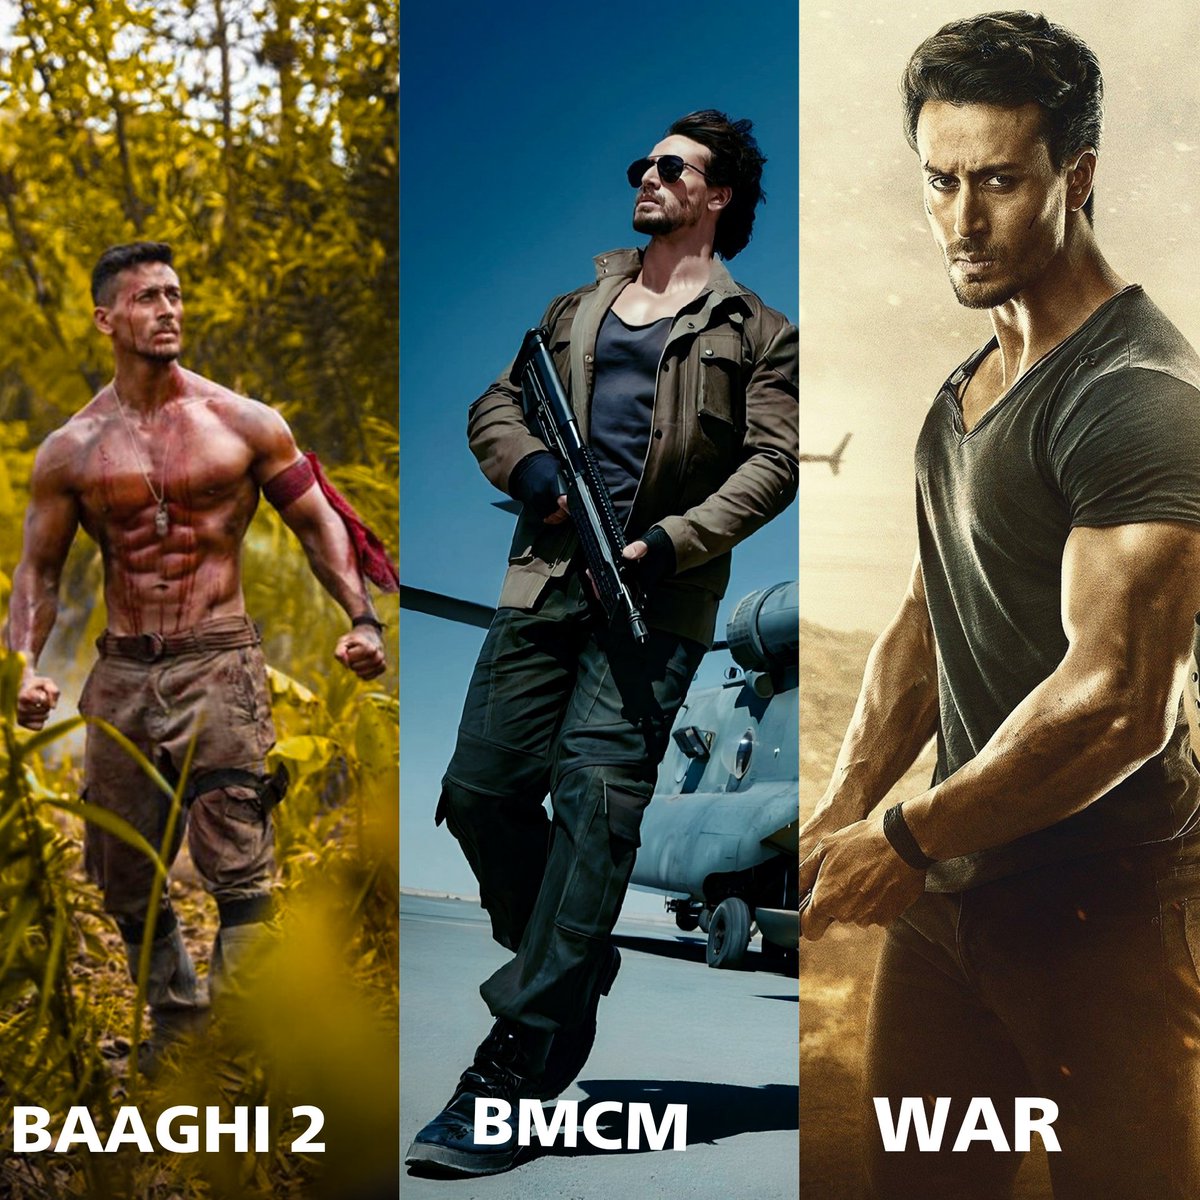 Which look of #TigerShroff sir did you like more?

Ronny in #Baaghi2 🪖
Chote Miyan in #BMCM 🔥
Khalid in #war ⚠️

Tell me in comments 👇👇